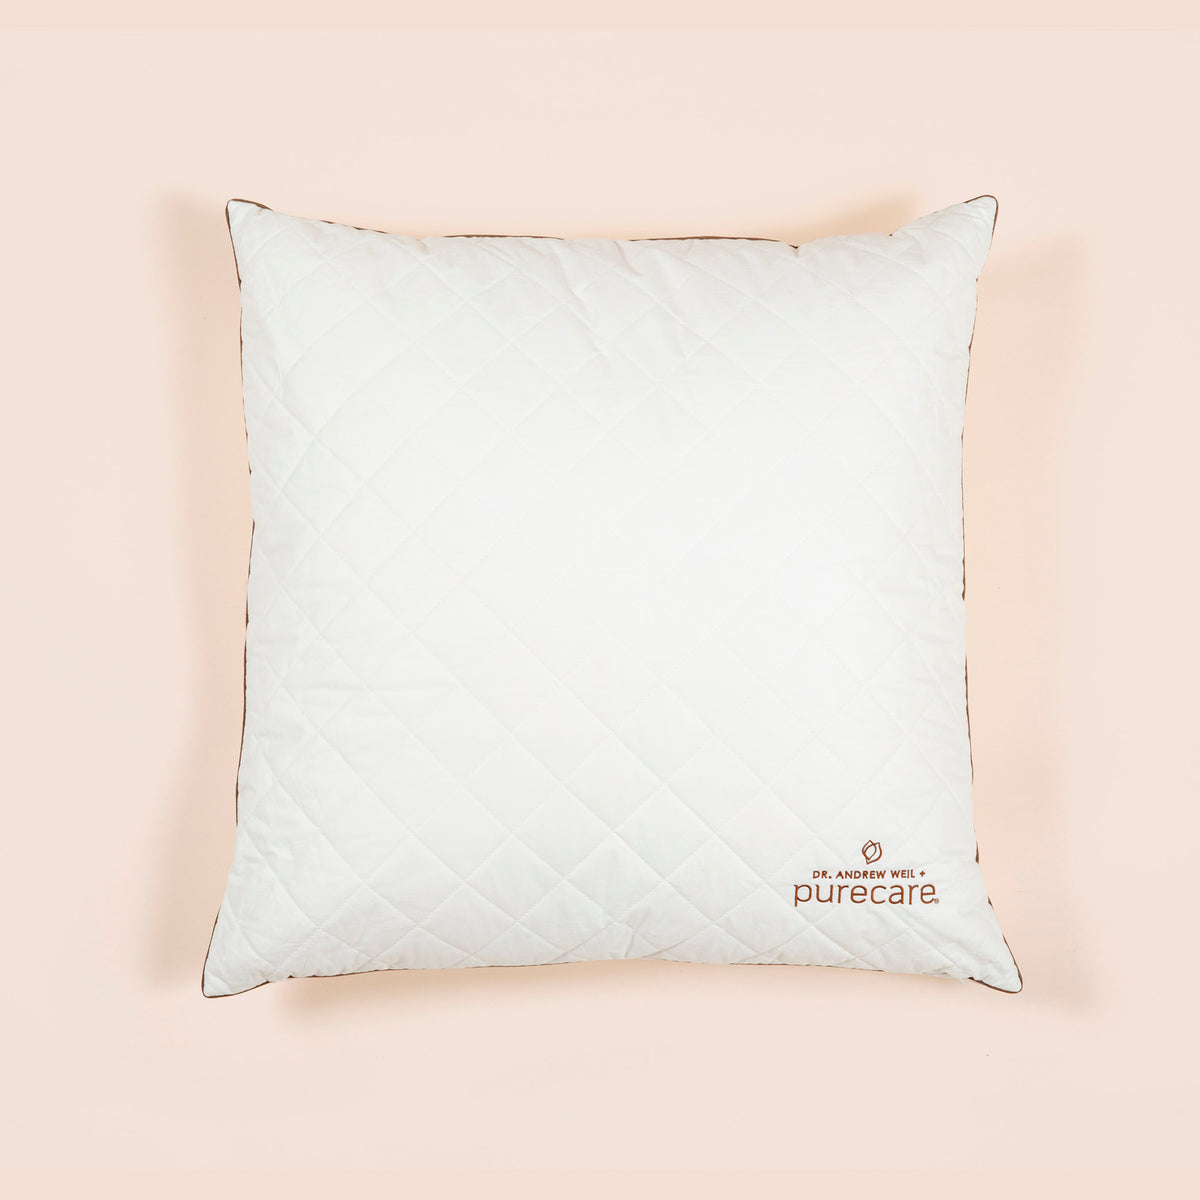 Image of Euro Pillow Insert on light pink background with Dr. Andrew Weil + Purecare logo in bottom right corner of pillow